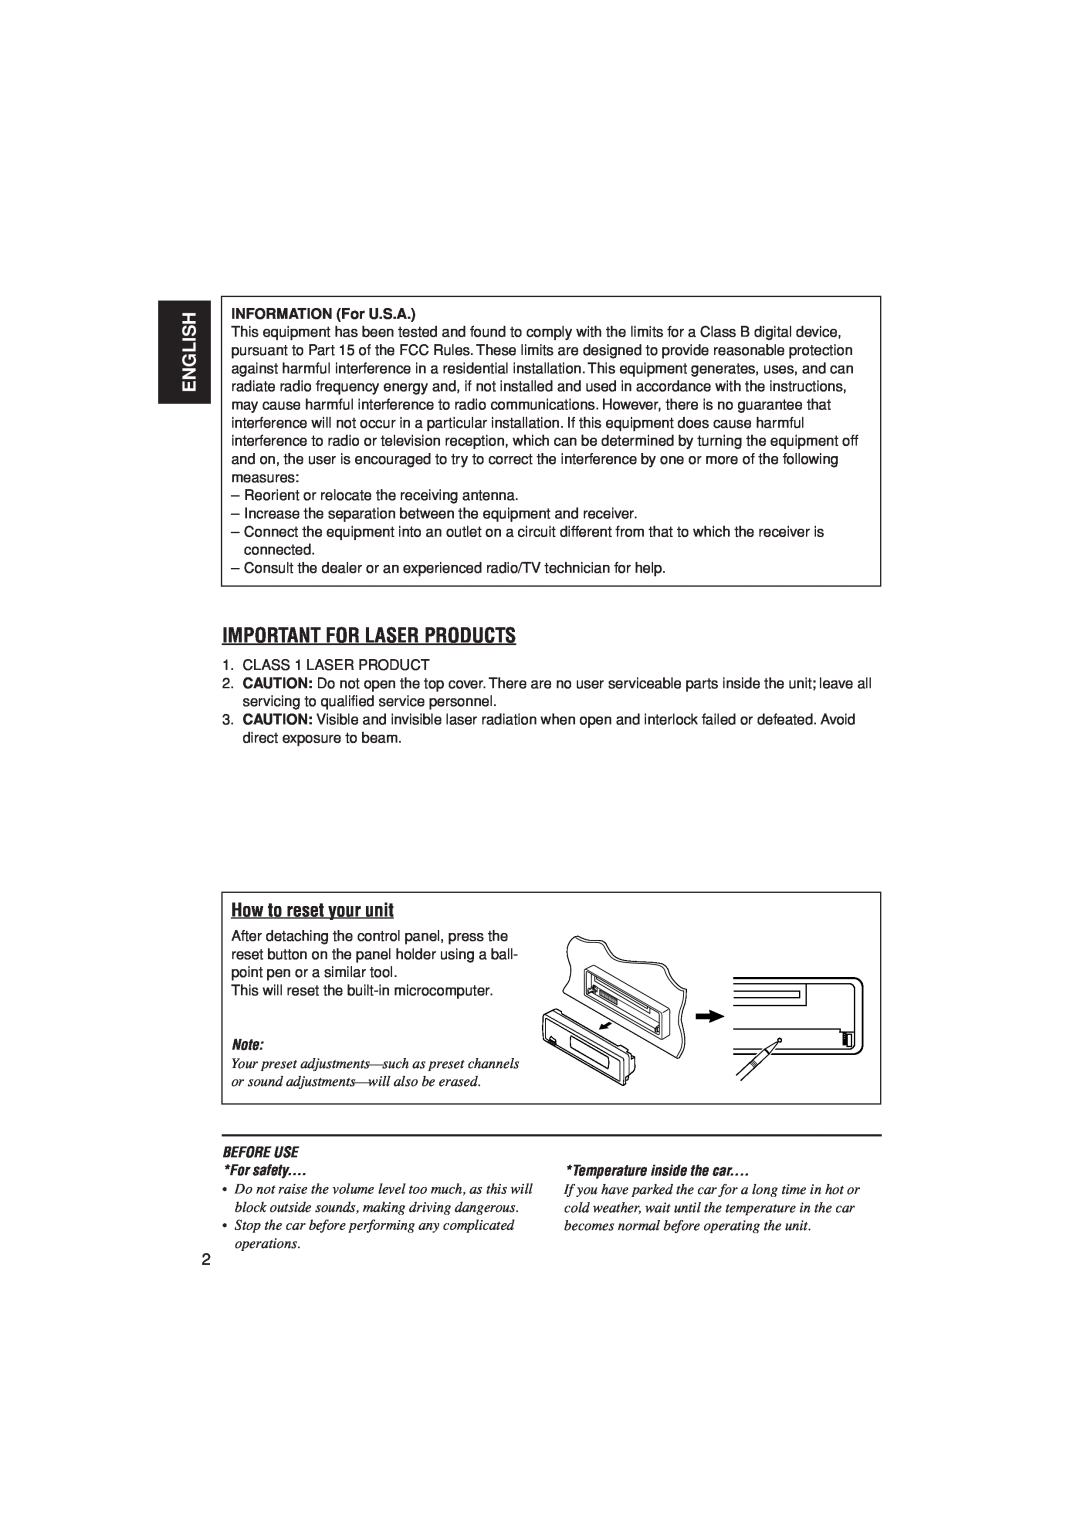 JVC KD-AR400 Important For Laser Products, English, How to reset your unit, INFORMATION For U.S.A, BEFORE USE For safety 